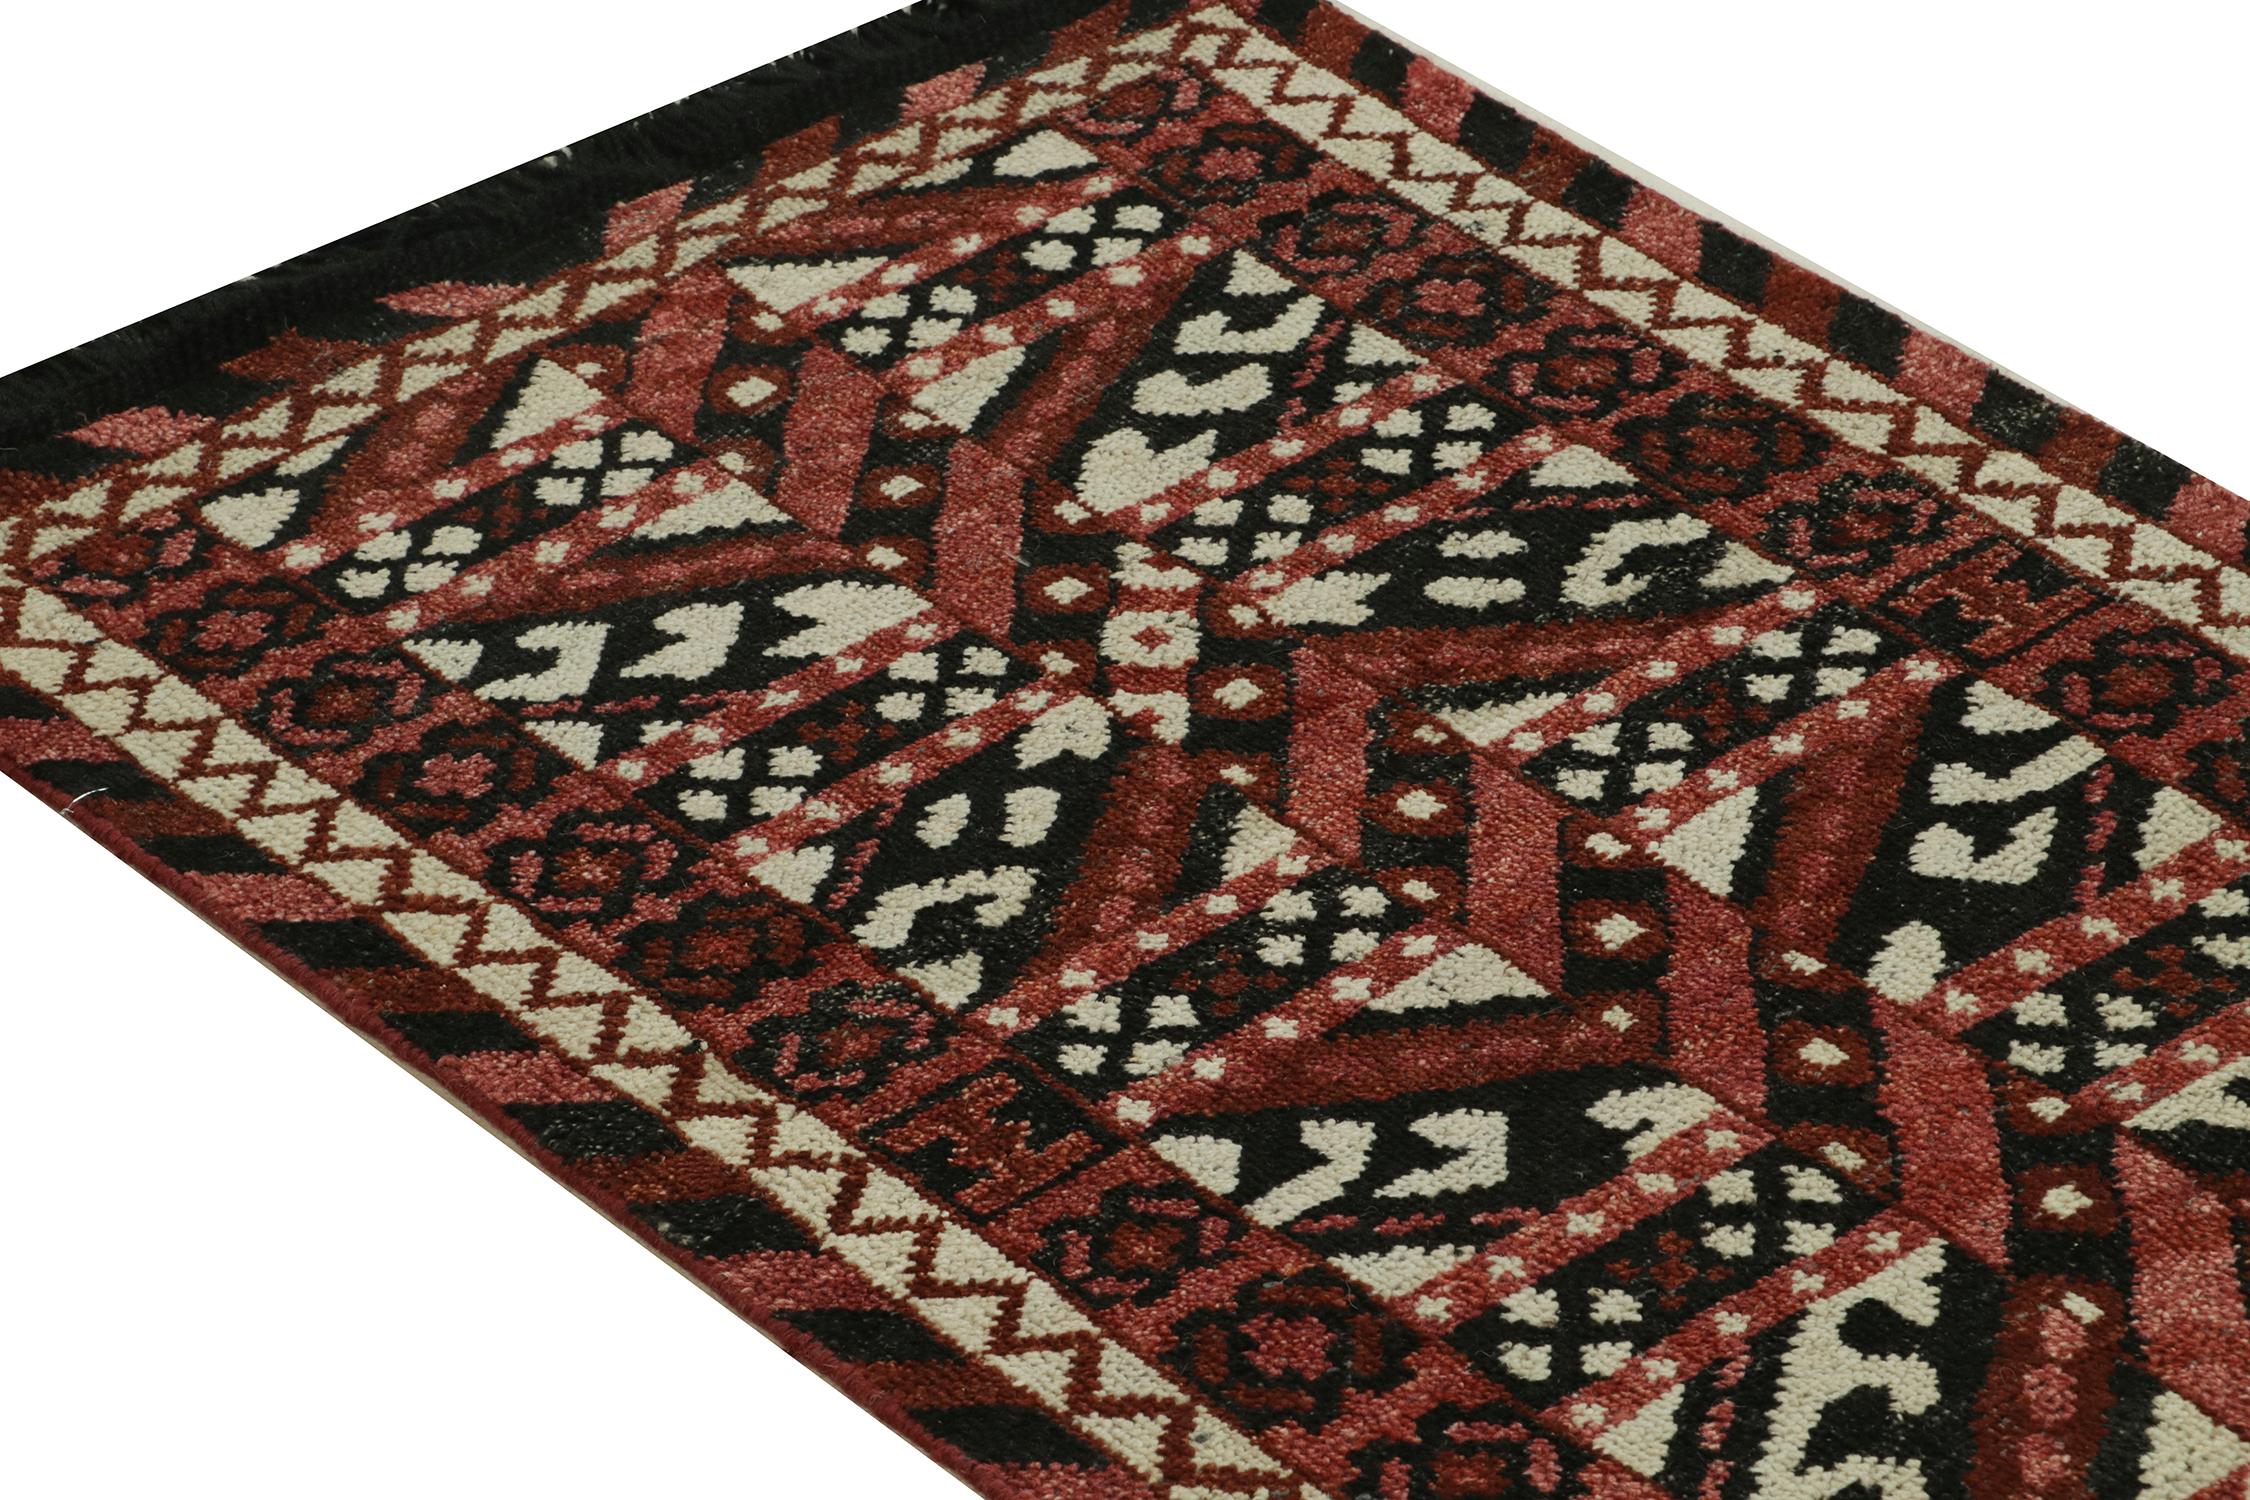 Hand-Knotted Rug & Kilim’s Tribal style runner in red, black and white geometric pattern For Sale